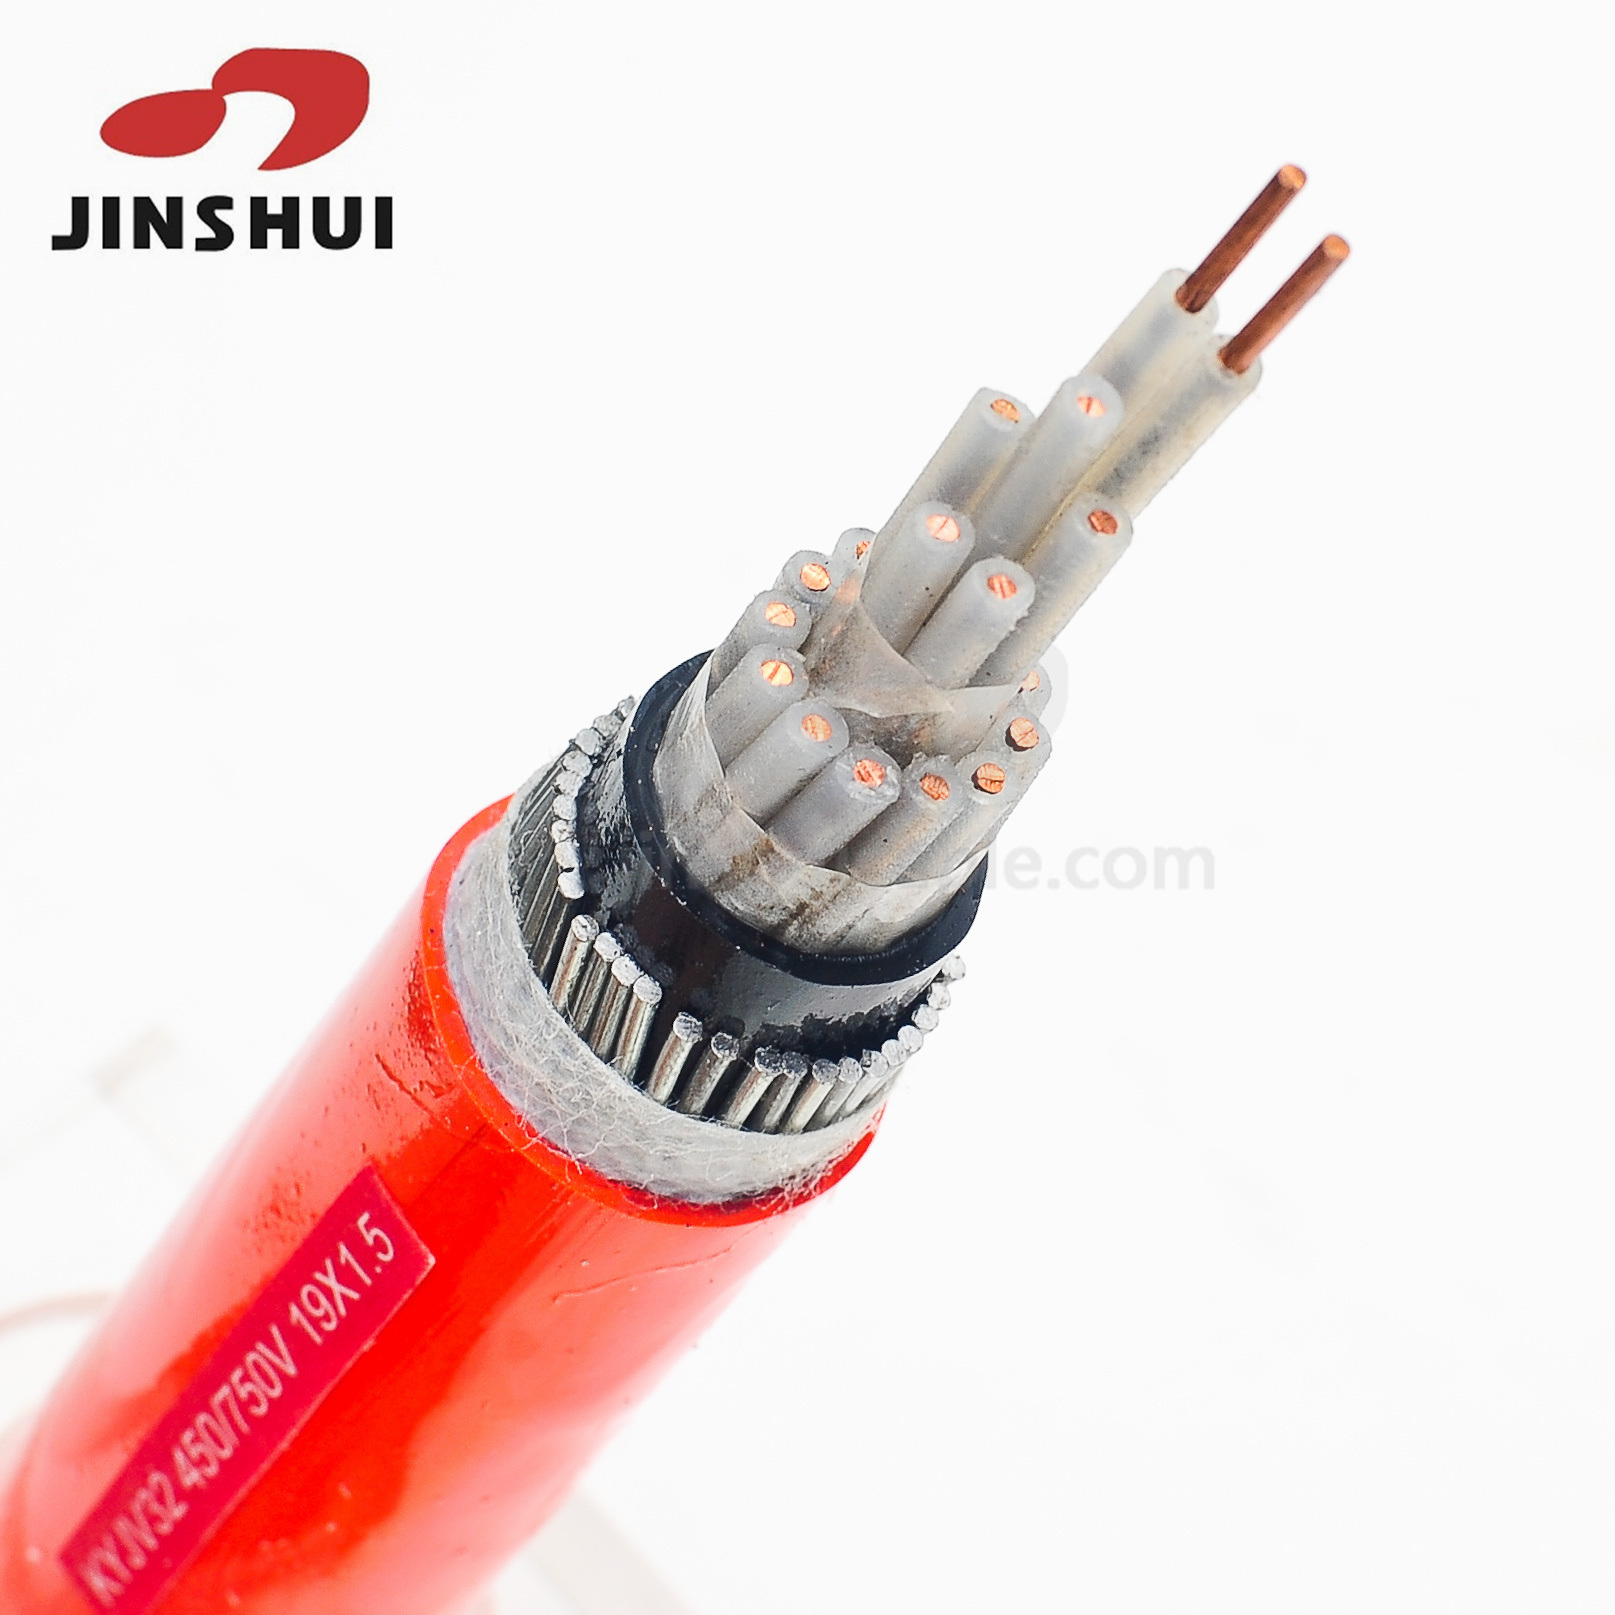 Control Flexible Cable Industrial Copper Cables